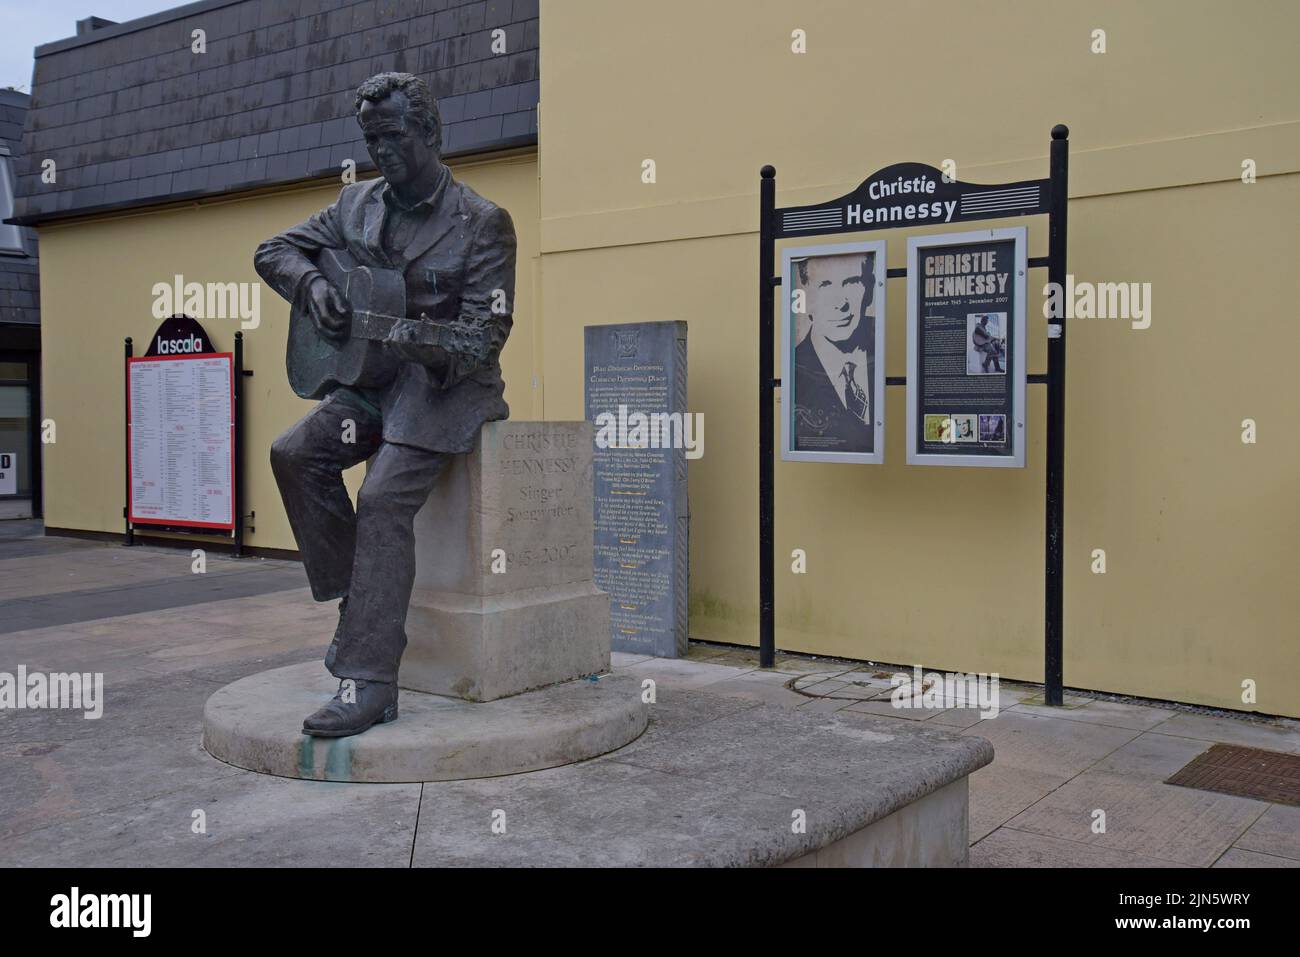 Memorial statue to Christie Hennessy, the Irish folk signer songwriter in Abbey Street, Tralee, County Kerry, Ireland. July 2022 Stock Photo